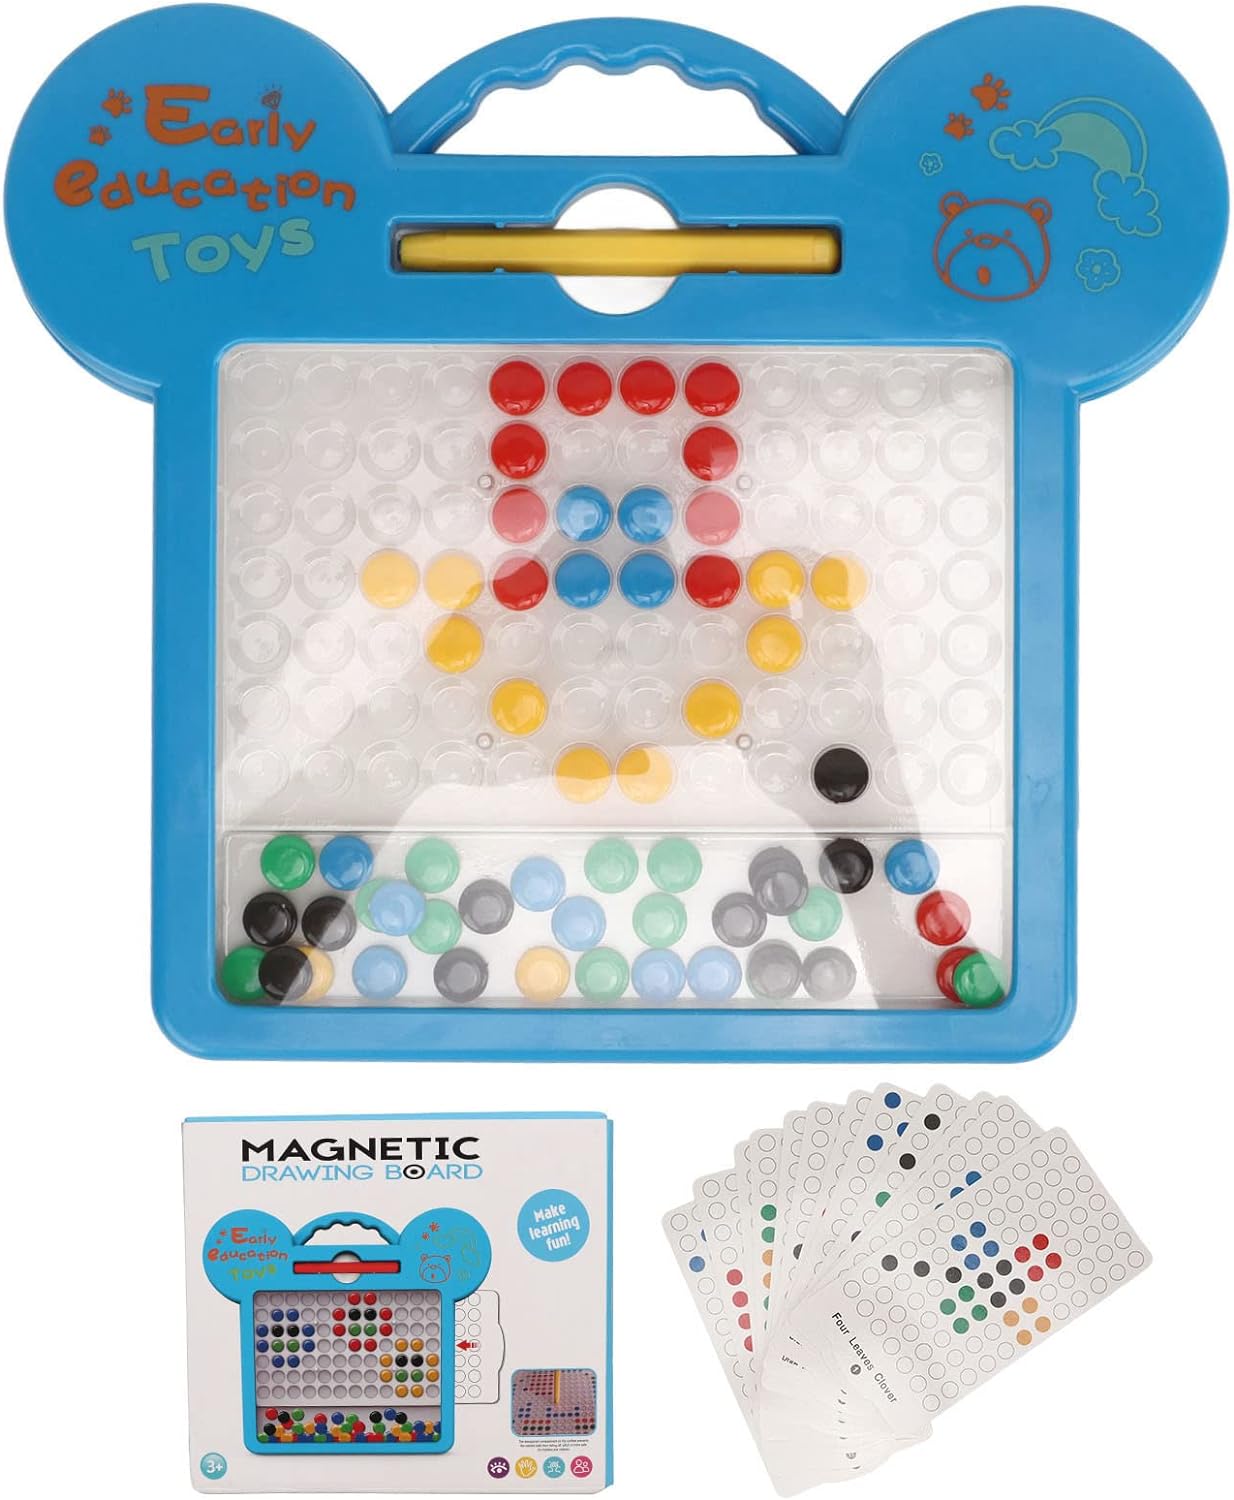 Magnetic Drawing Board for over 3 Years